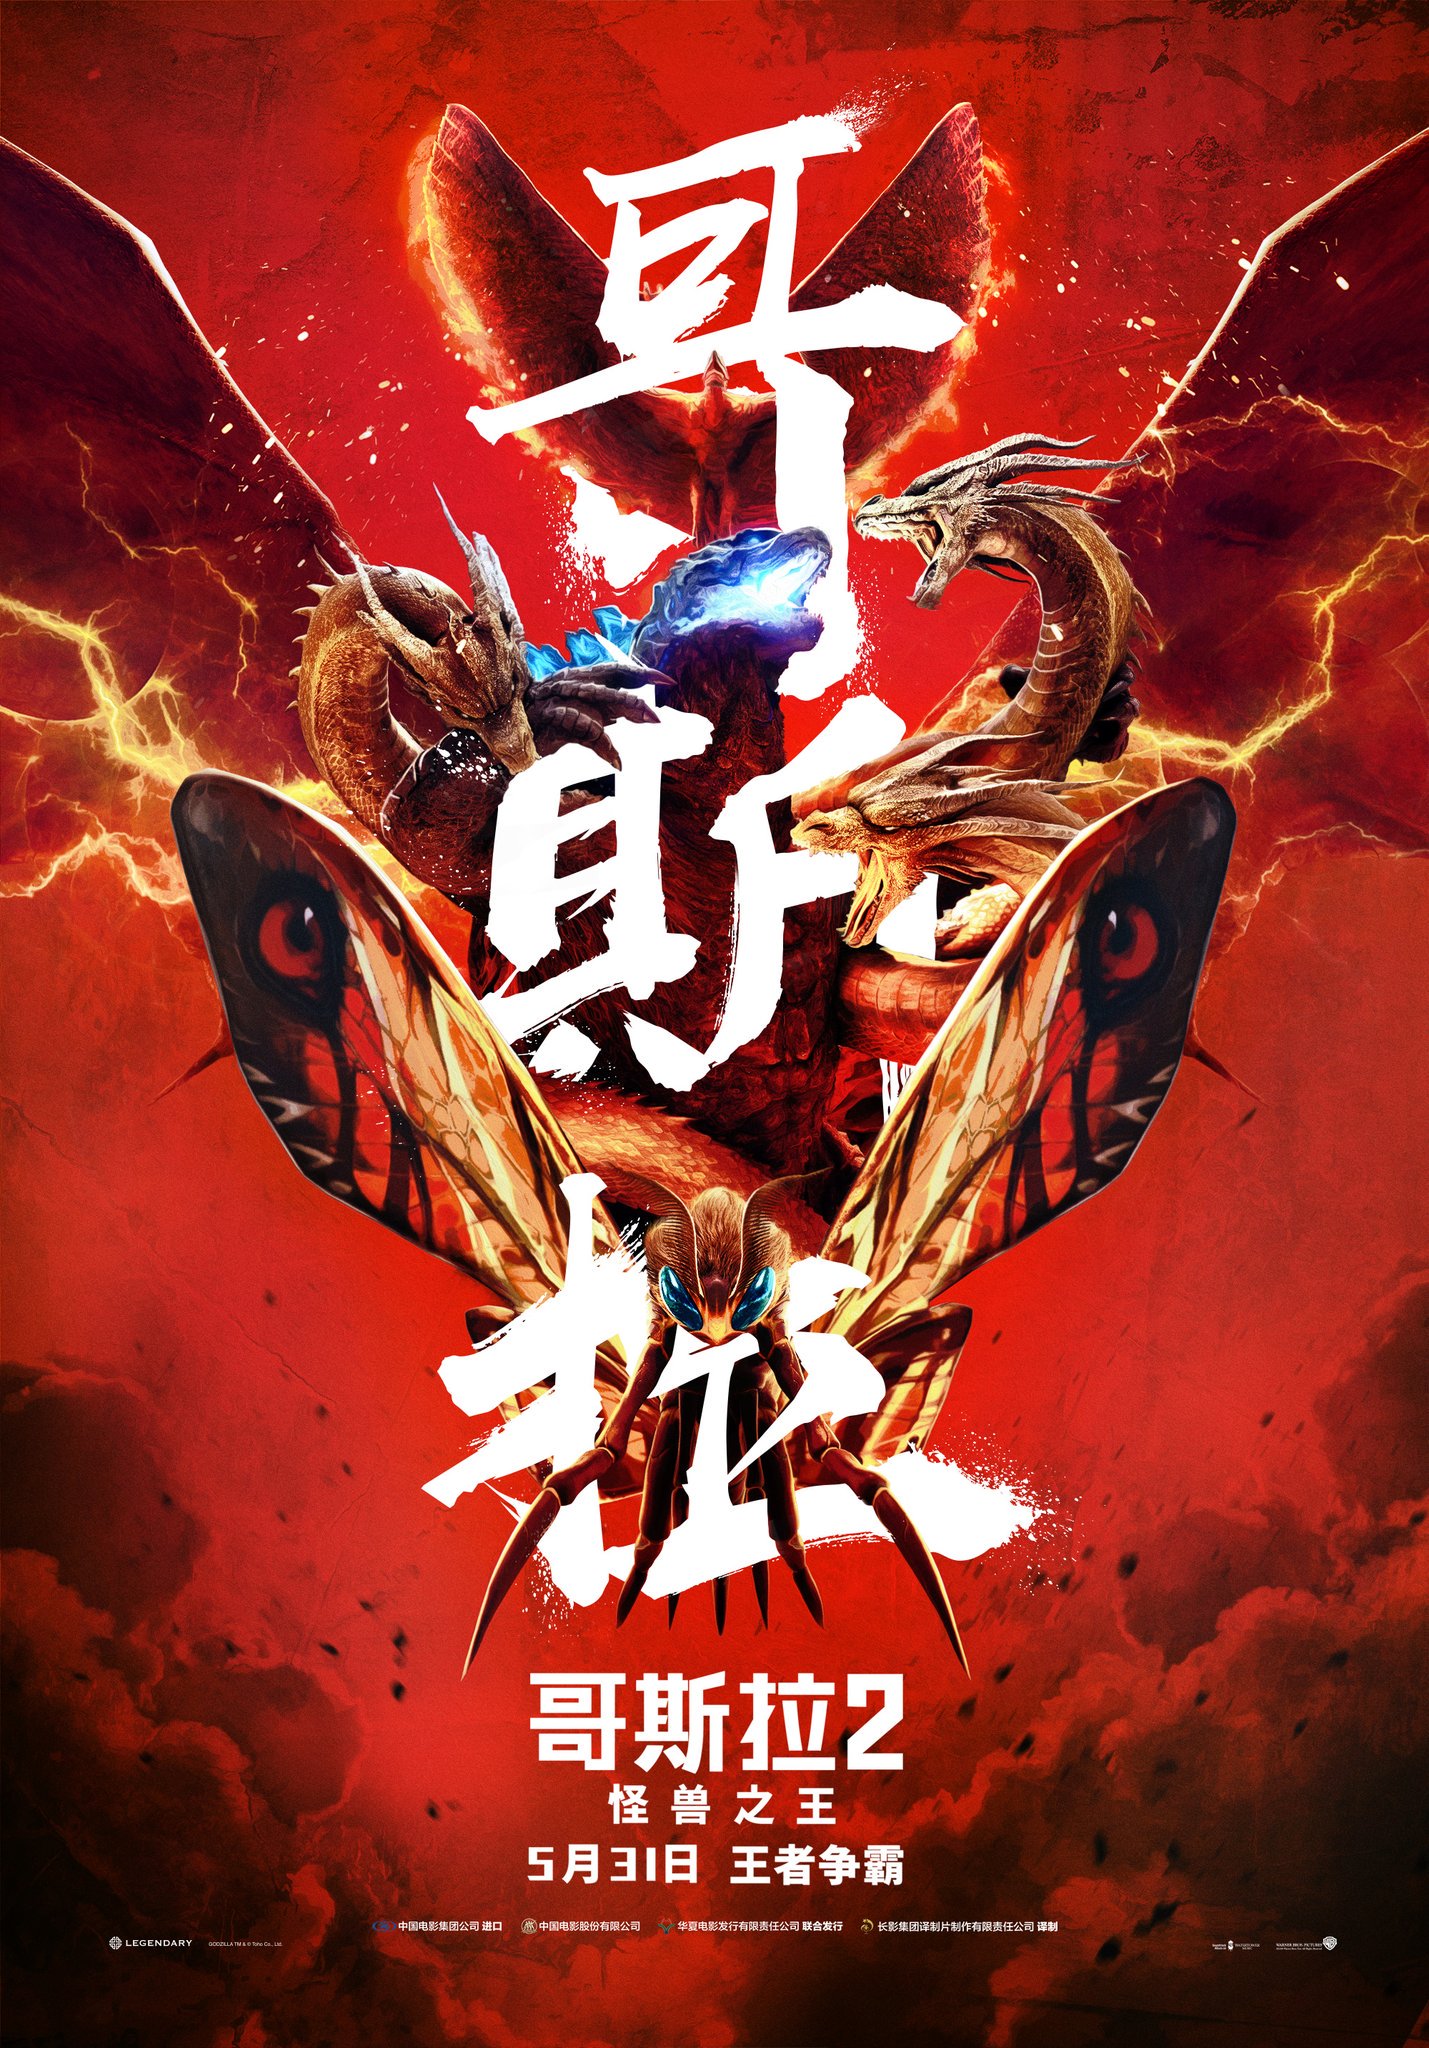 Godzilla 2: King of the Monsters Chinese Poster